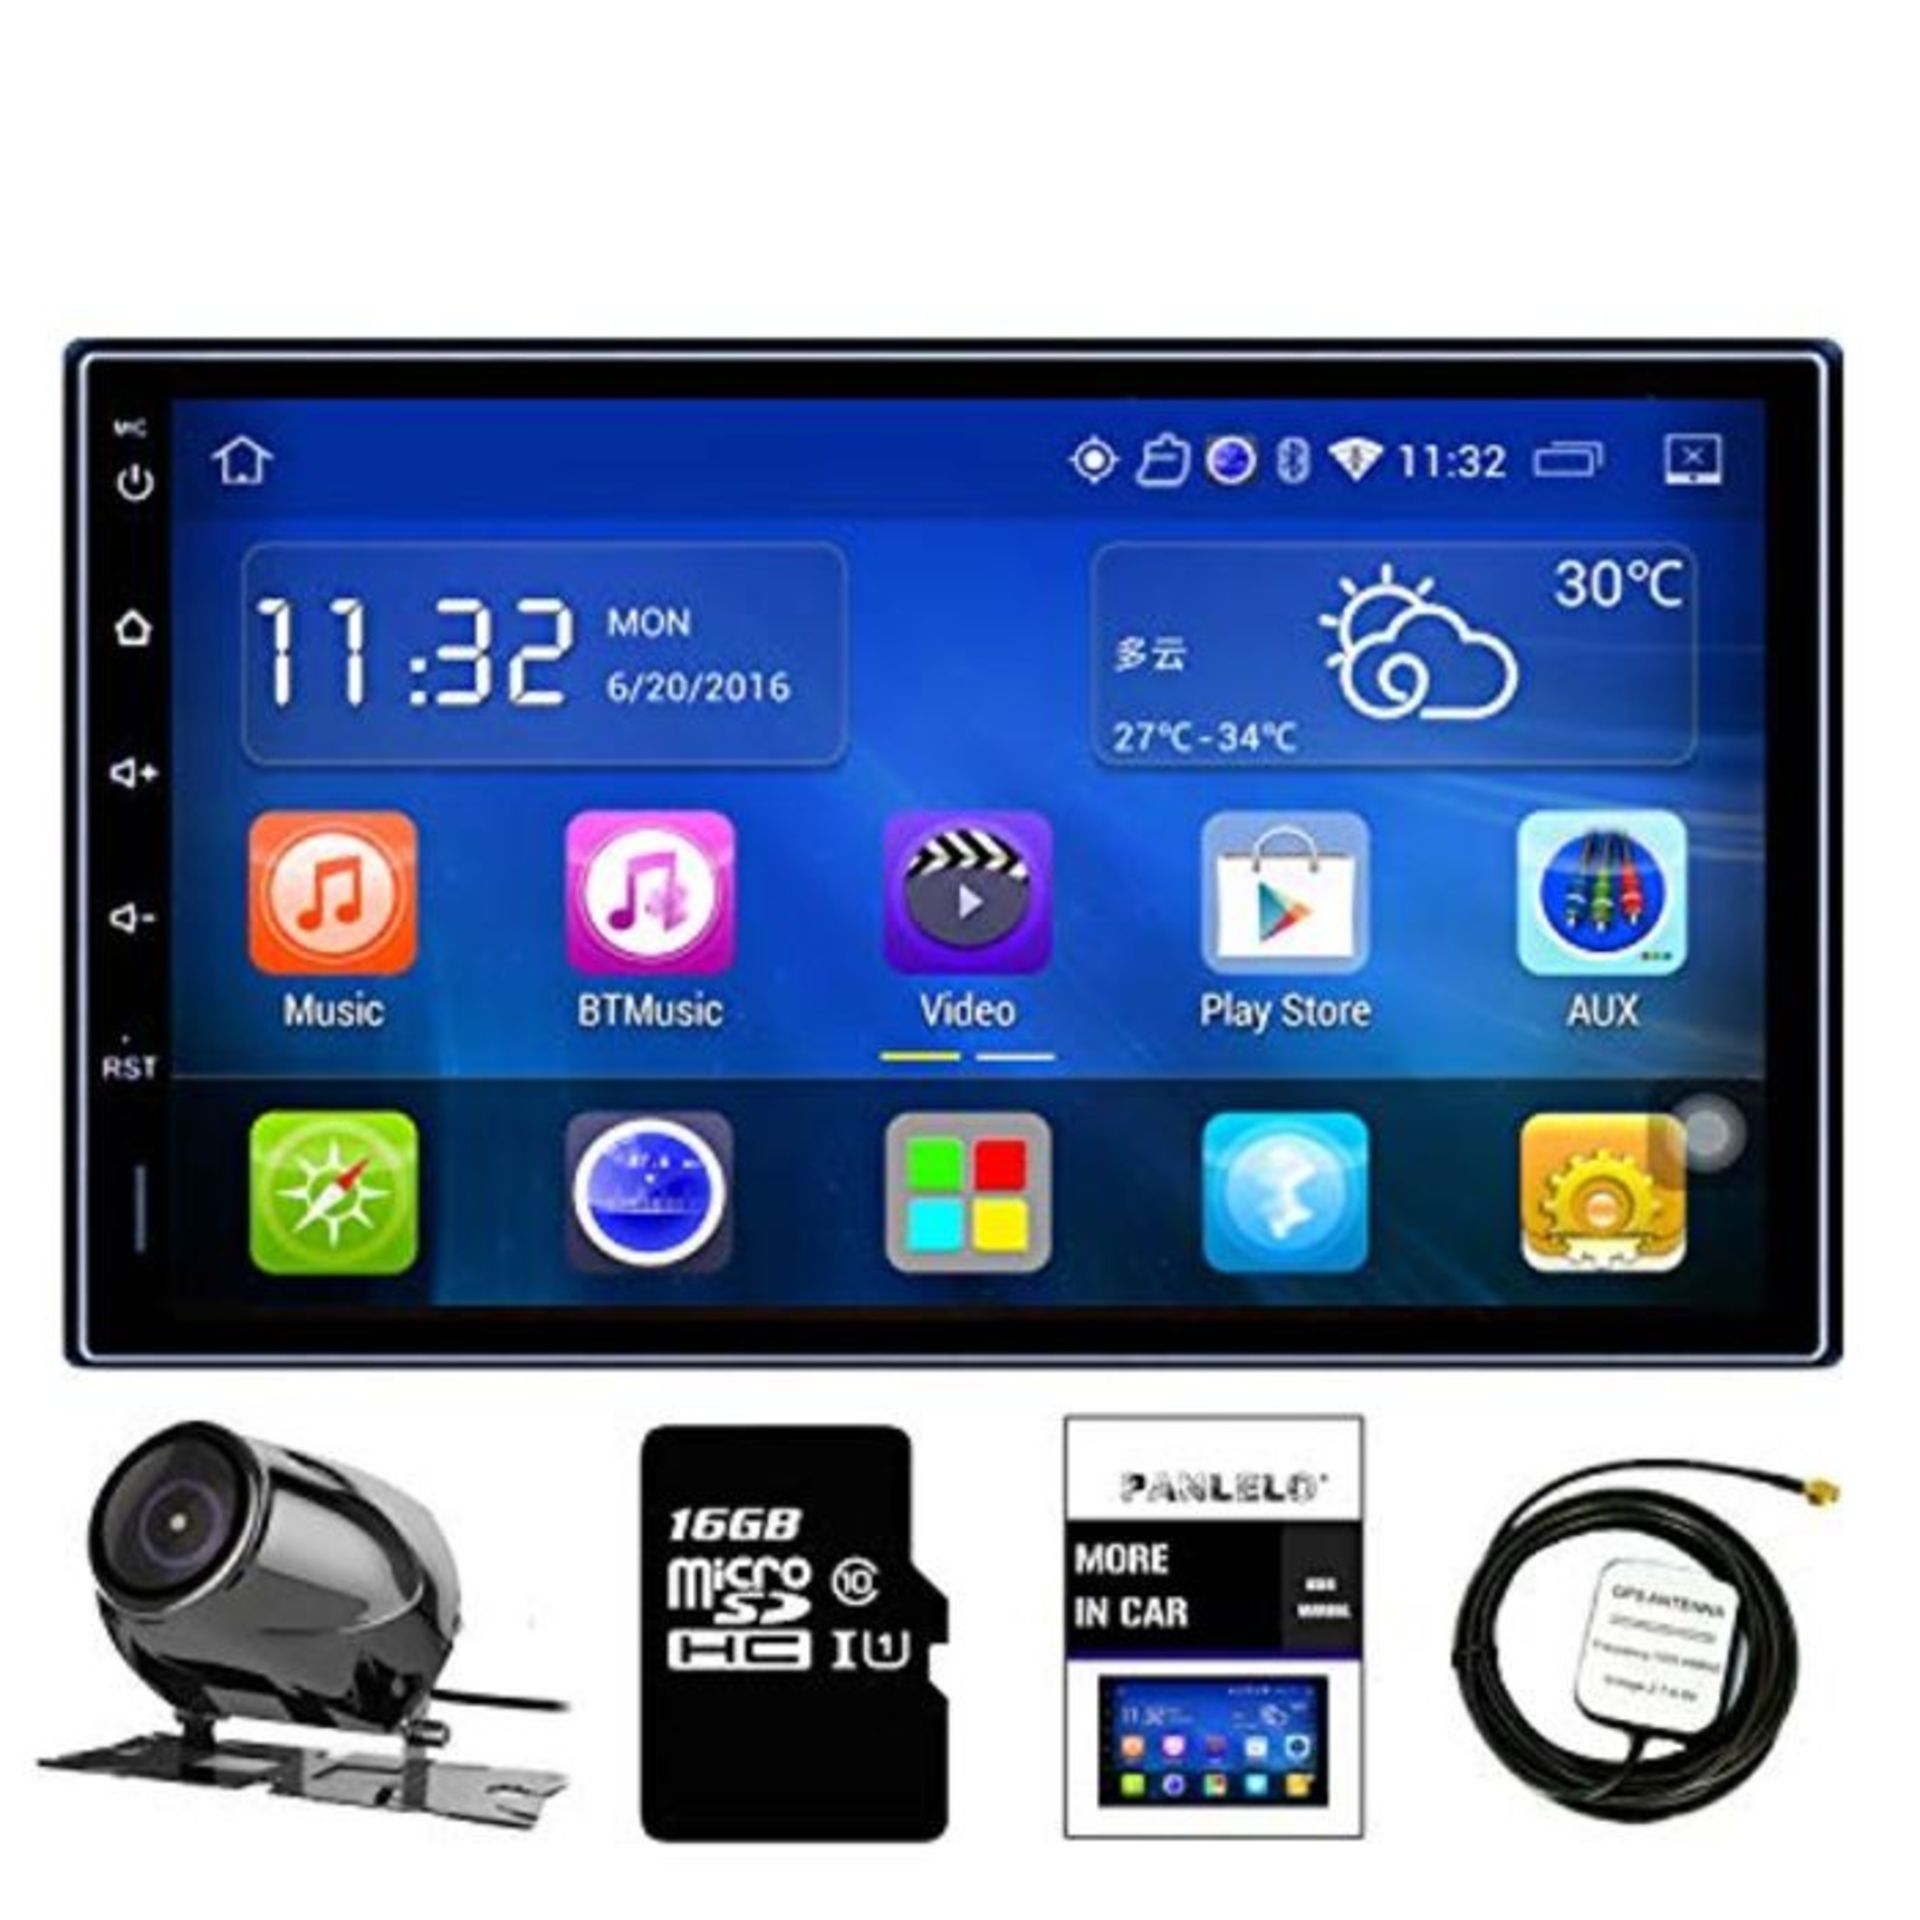 RRP £86.00 Panlelo Android Car Stereo Rear View Camera Quad Core 1G RAM + 16G ROM 16G SD Card 7 i